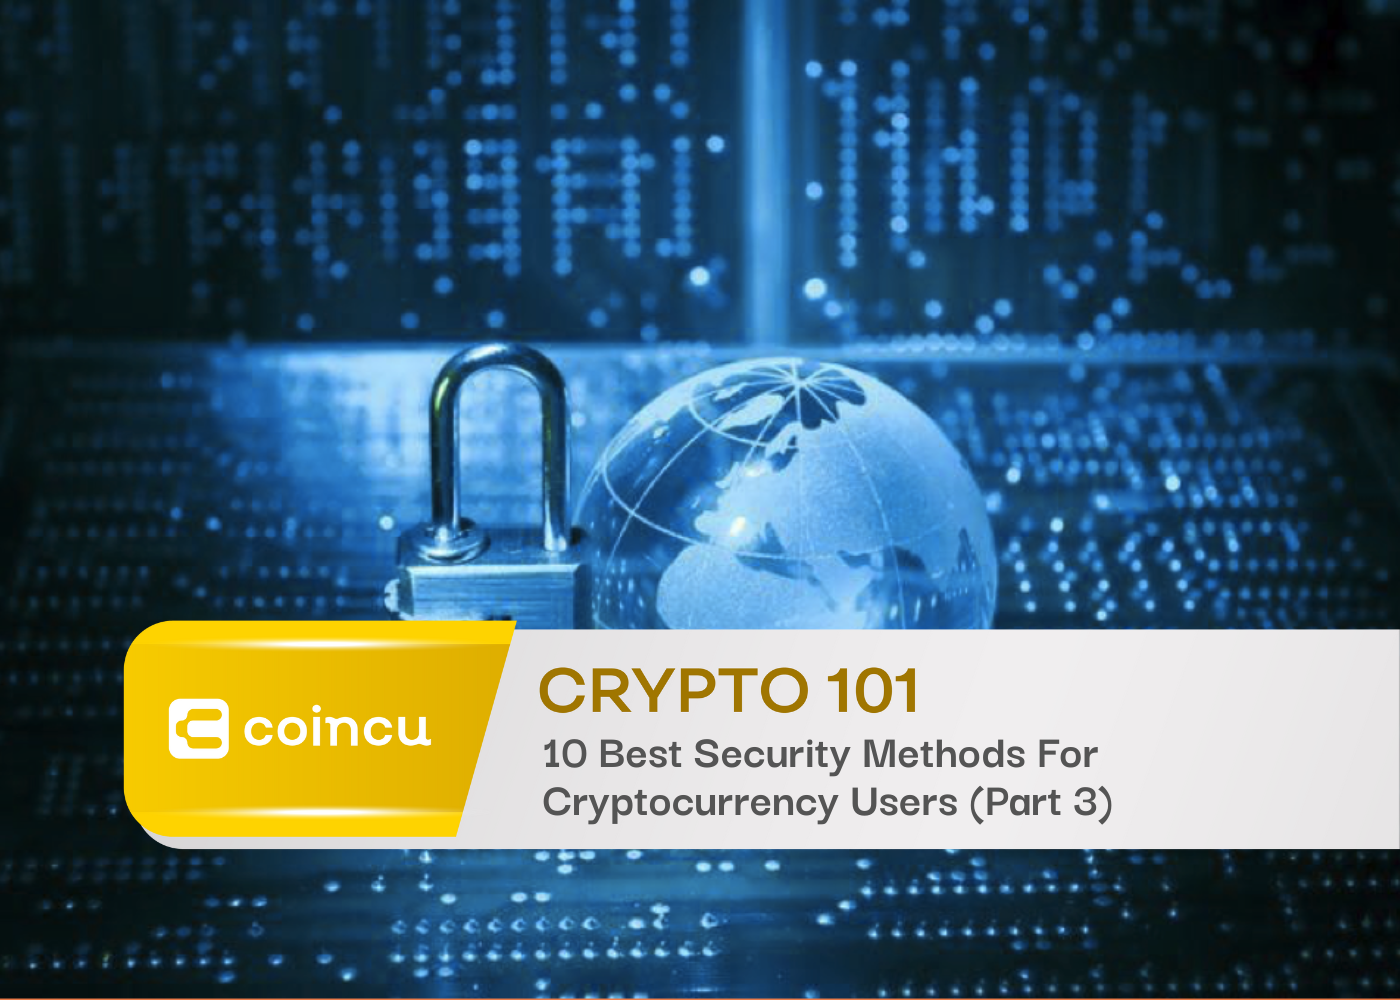 Crypto 101: 10 Best Security Methods For Cryptocurrency Users (Part 3)